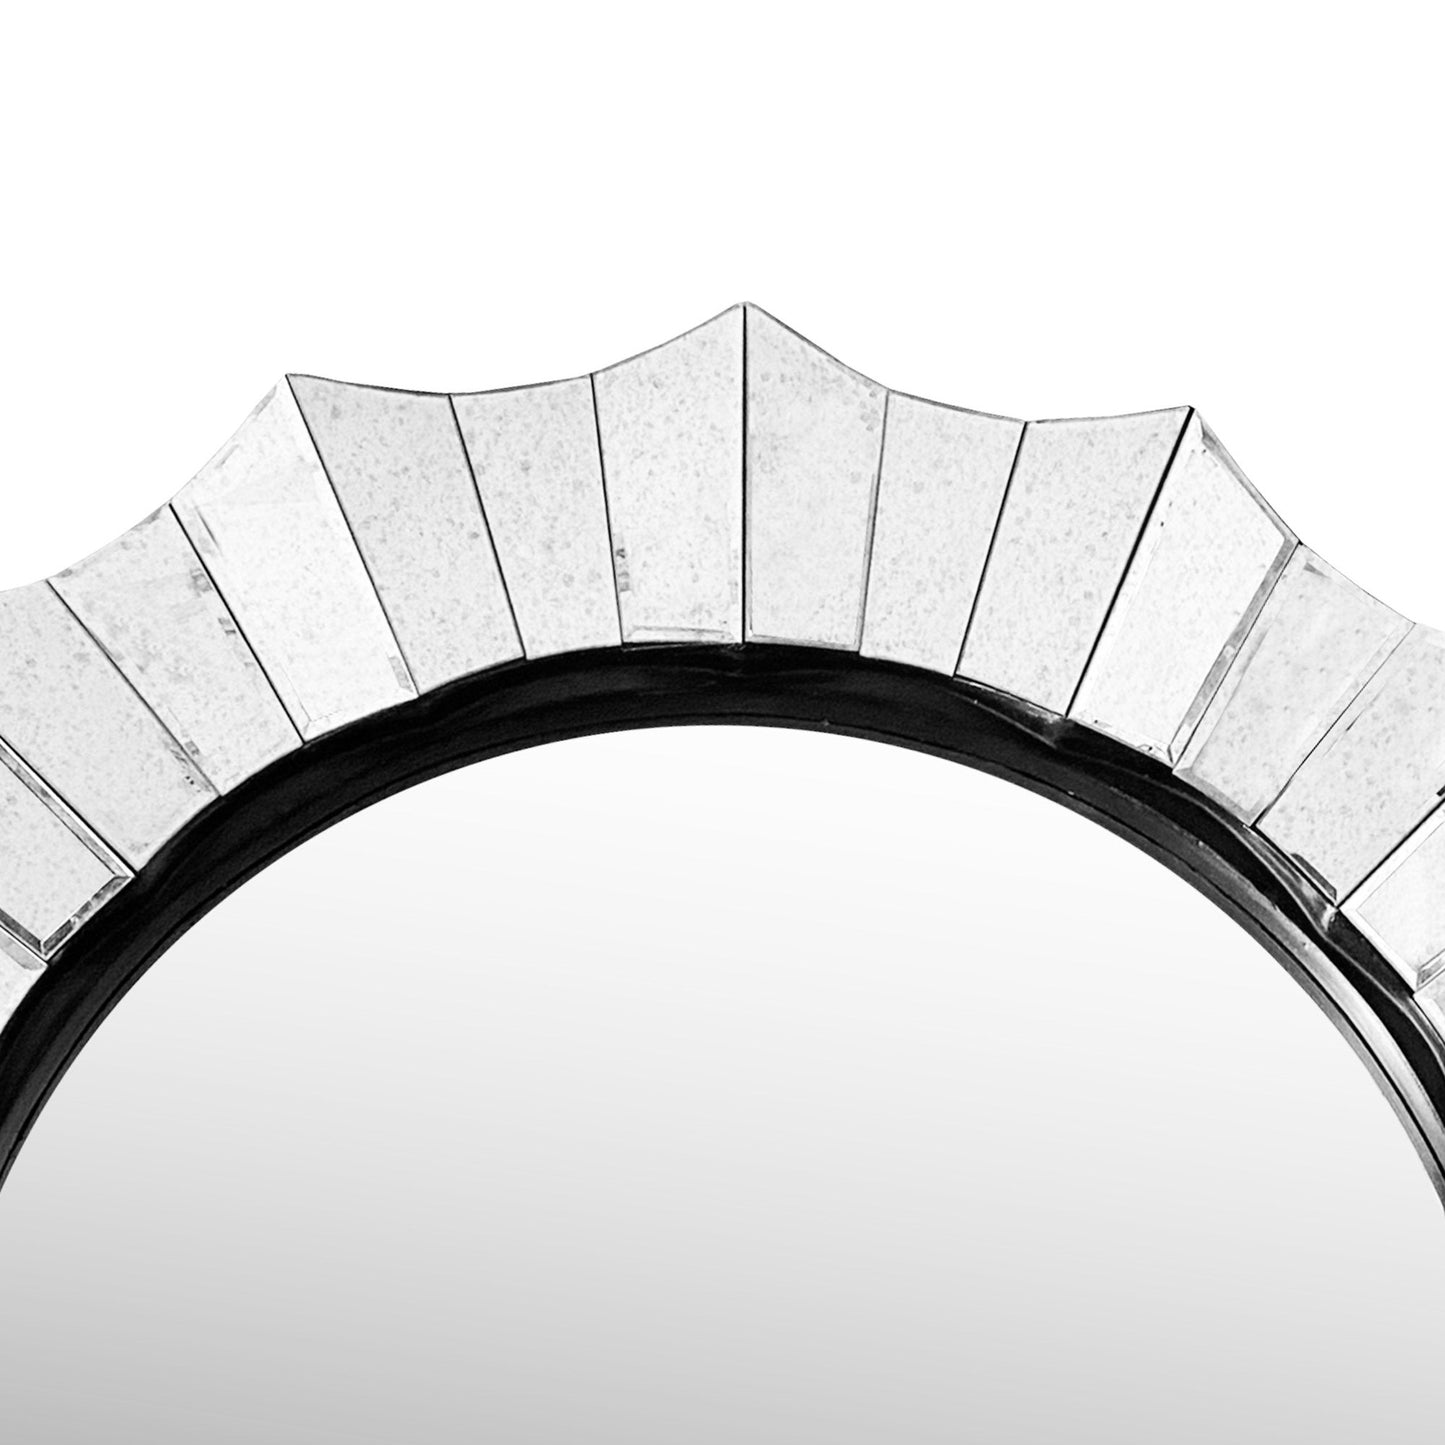 Benzara Round Silver Accent Wall Mirror With Scalloped Design and Beveled Edges